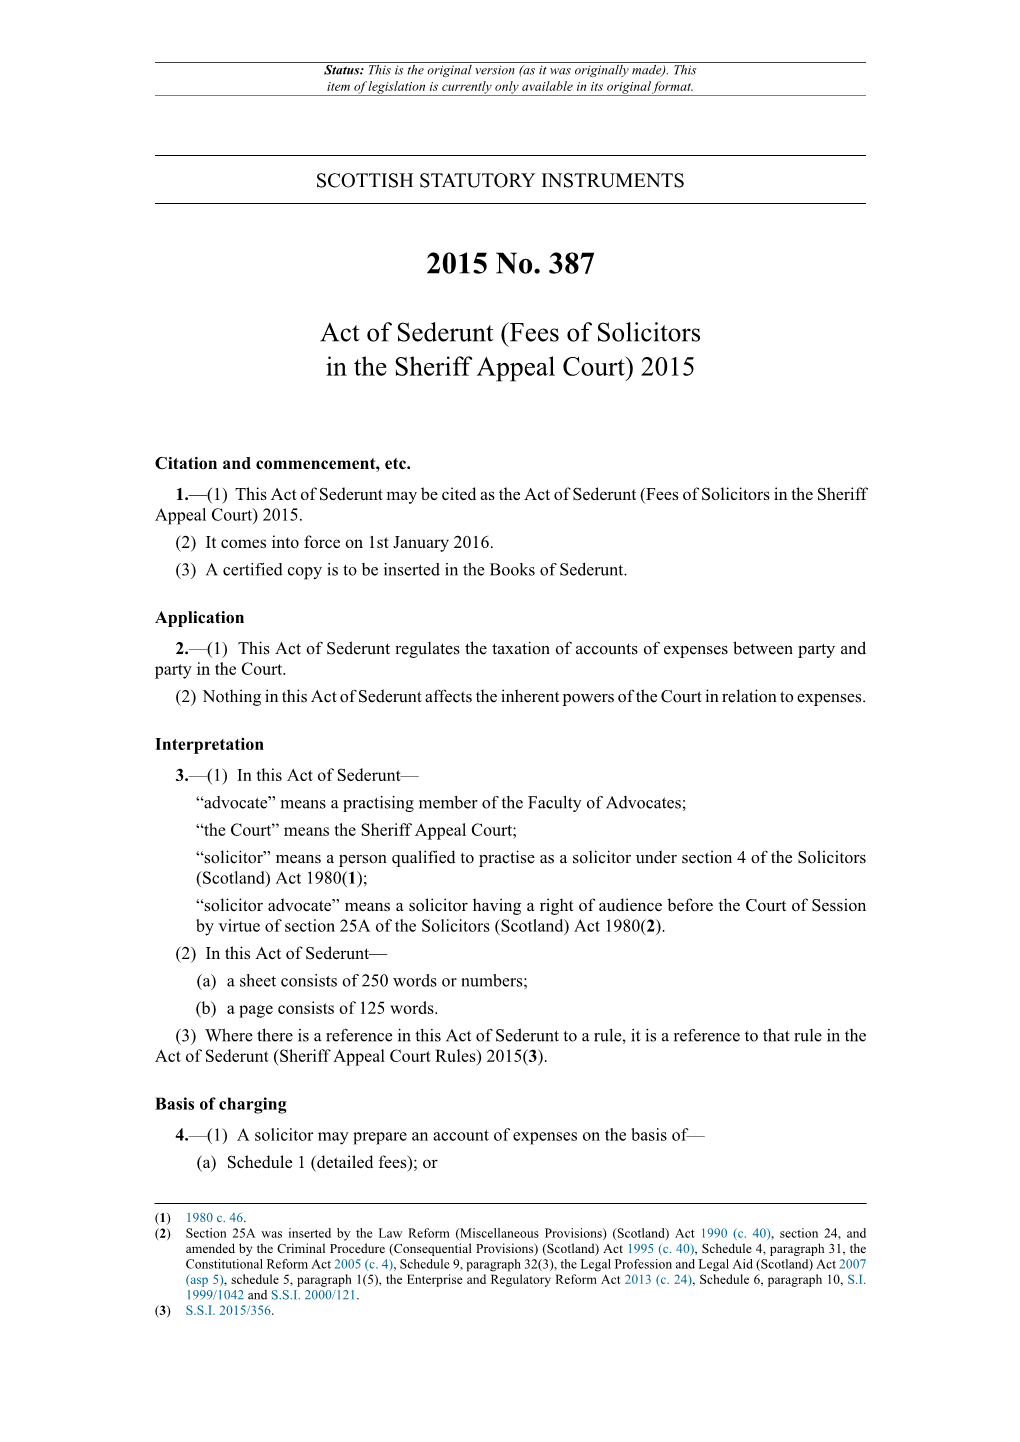 Act of Sederunt (Fees of Solicitors in the Sheriff Appeal Court) 2015